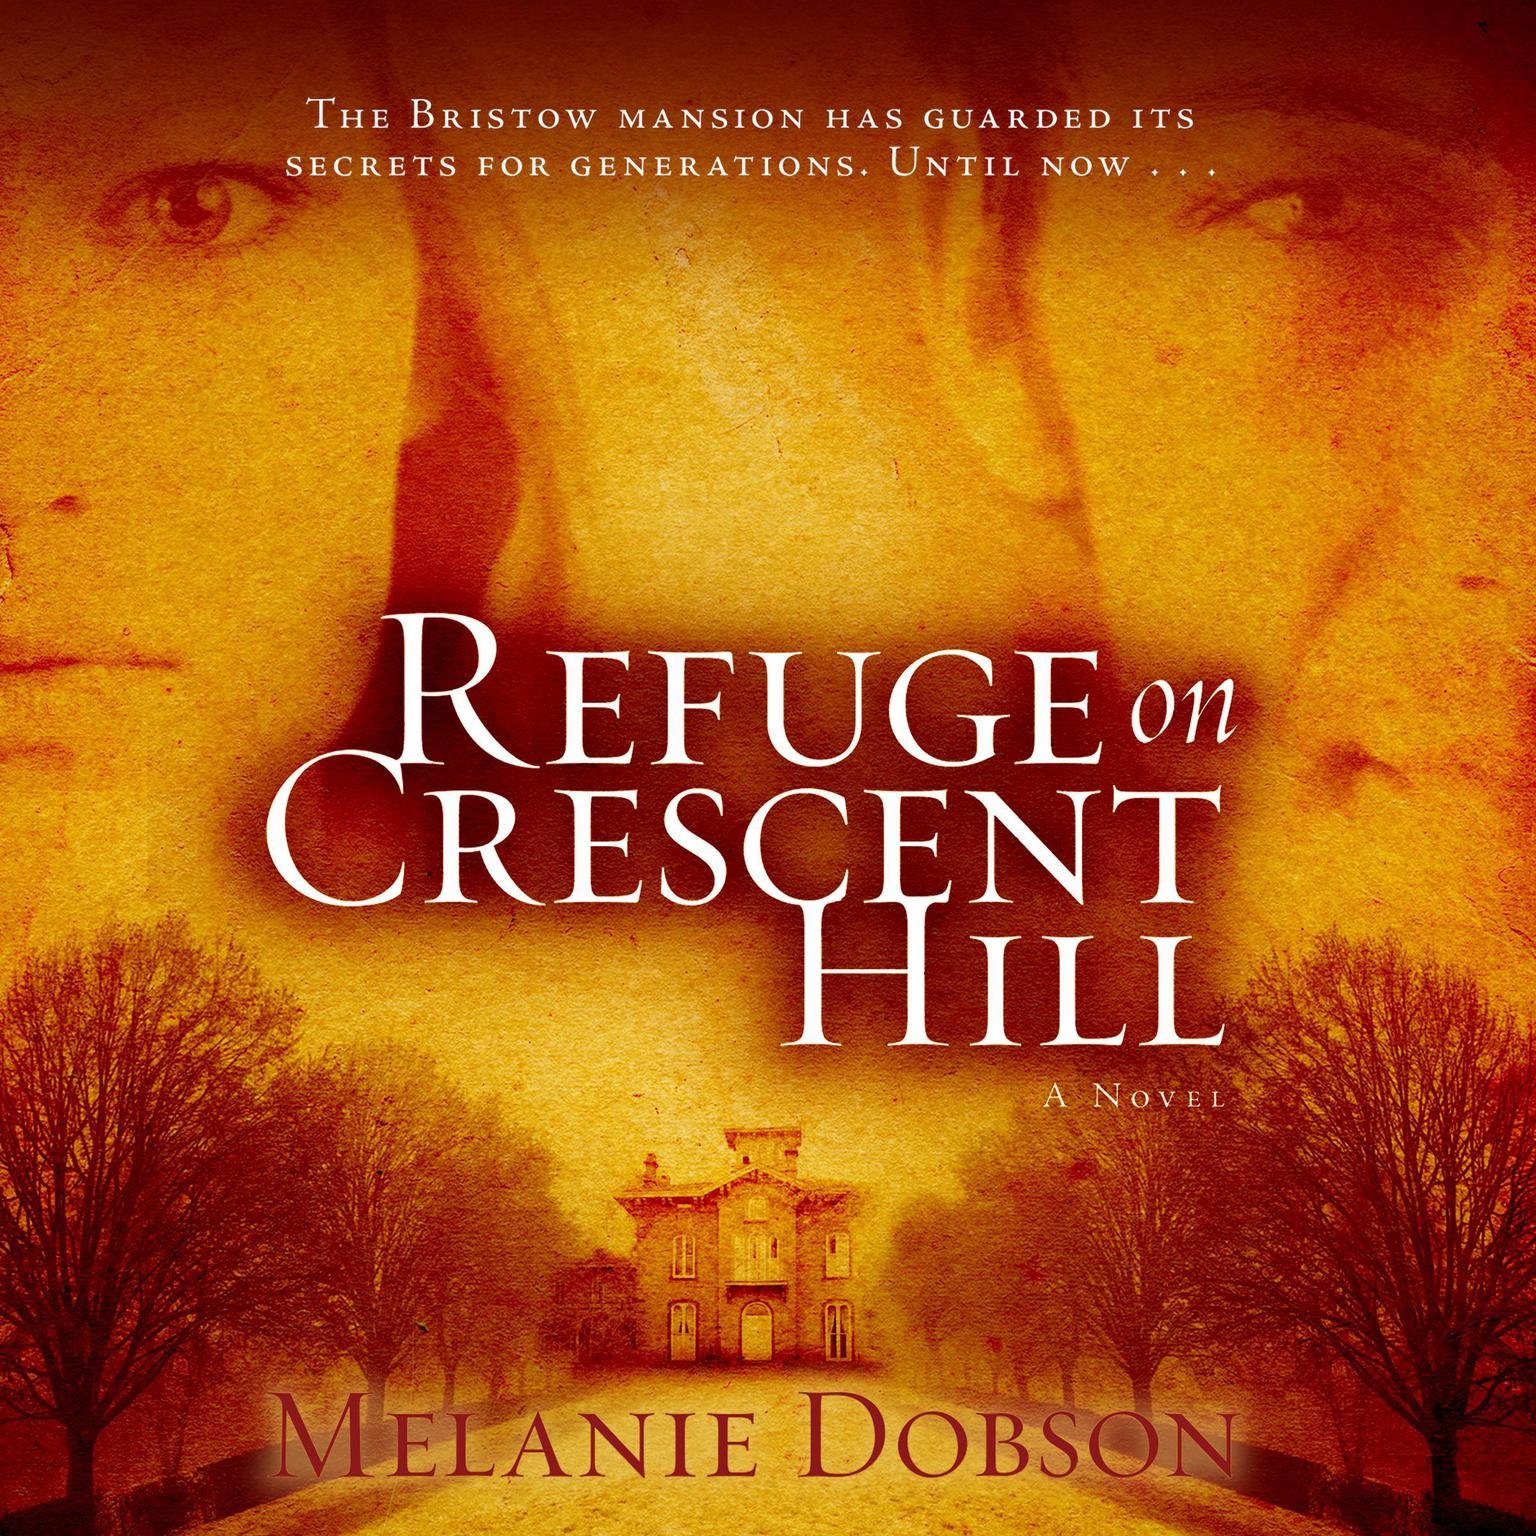 Refuge on Crescent Hill Audiobook, by Melanie Dobson